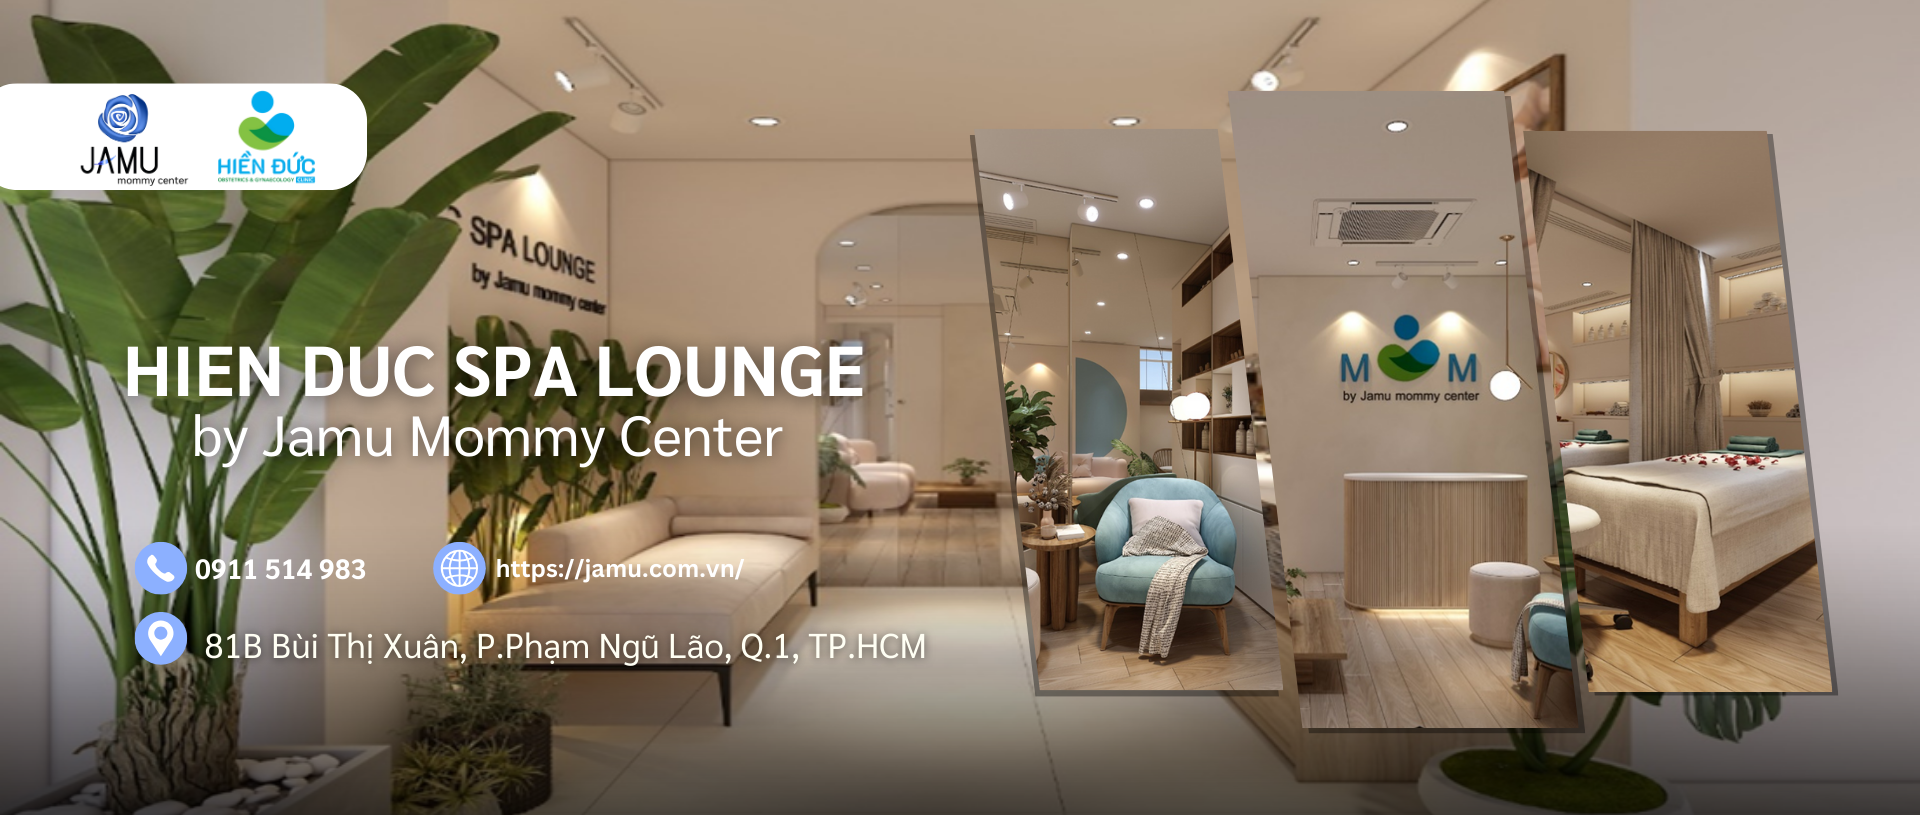 Hien Duc Spa Lounge By Jamu Mommy Center